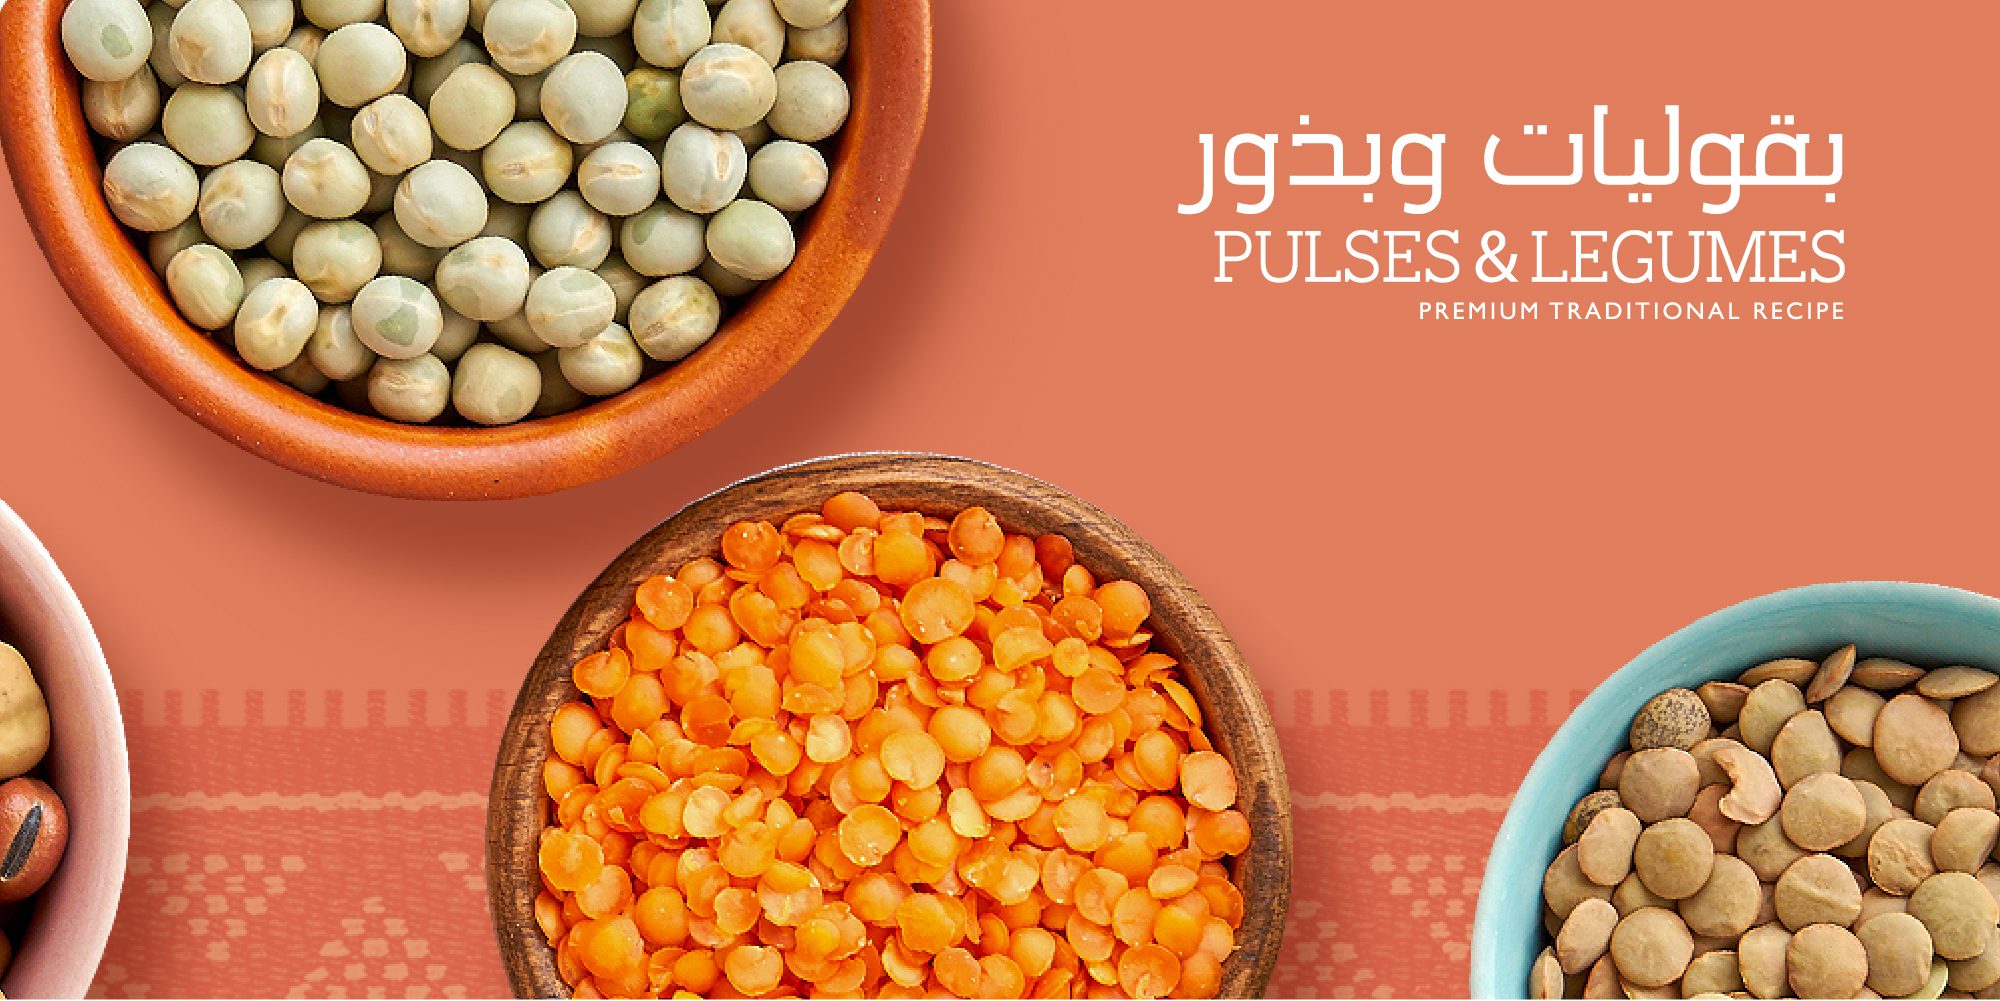 PULSES AND LEGUMES